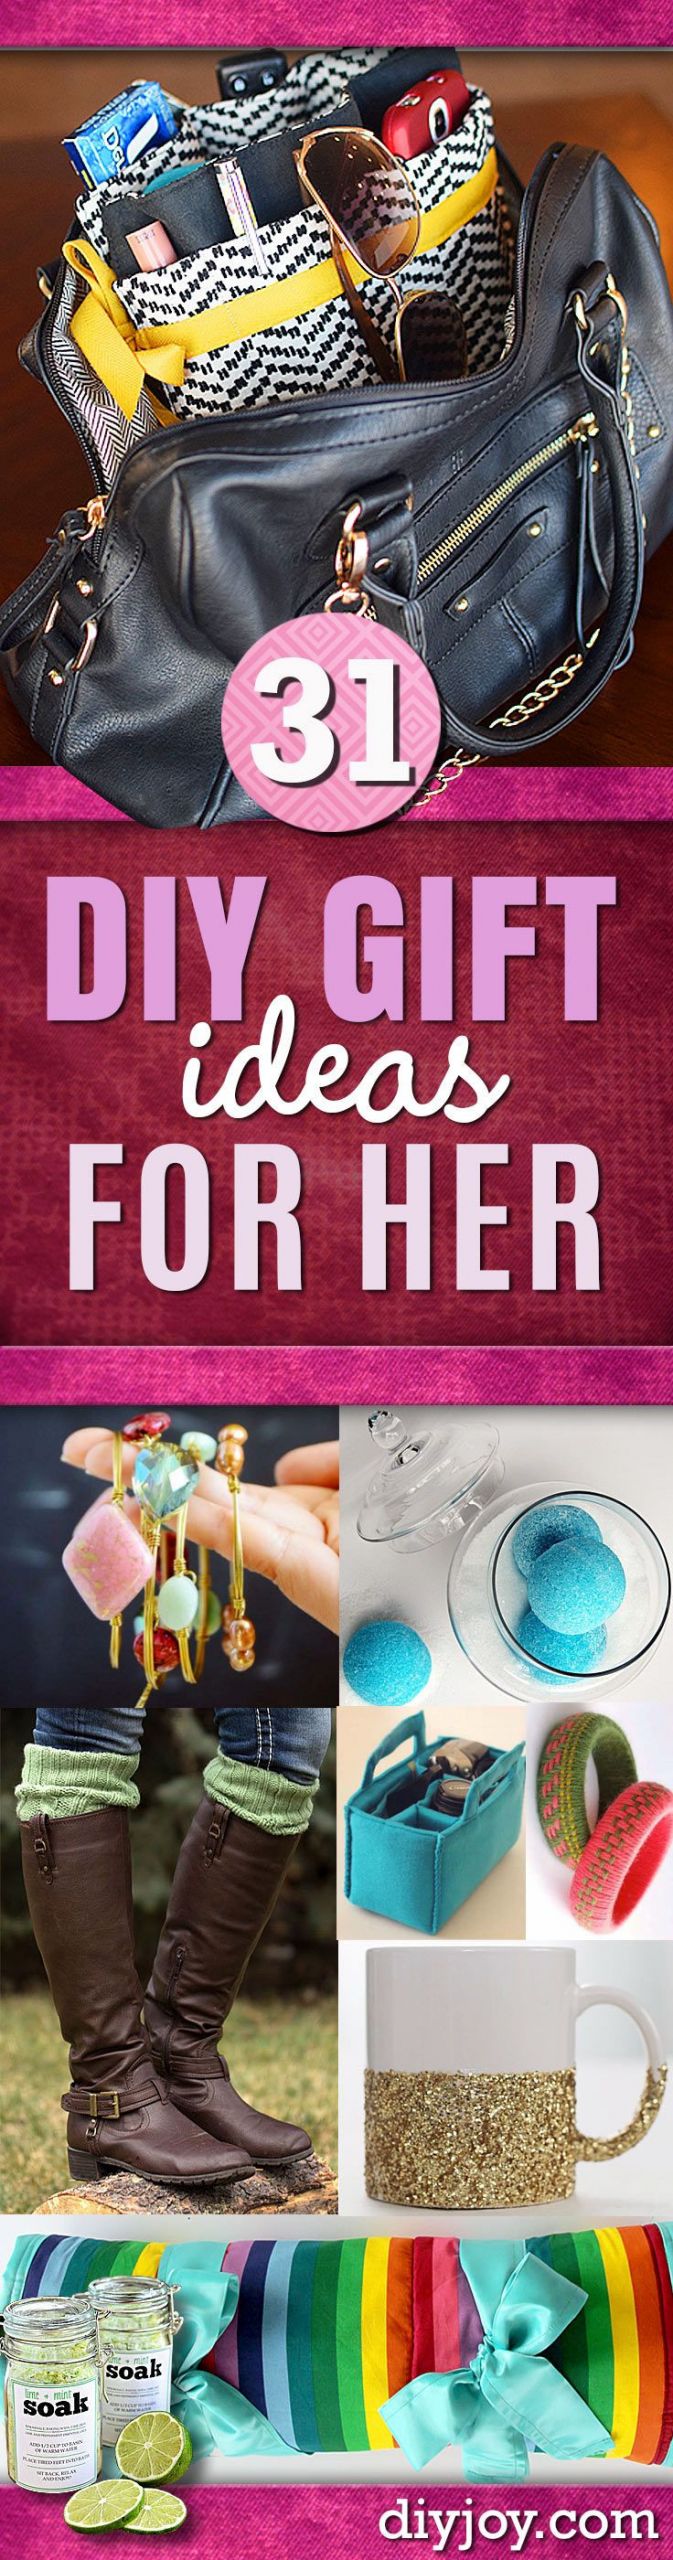 Birthday Gift Ideas For Your Wife
 DIY Gift Ideas for Her